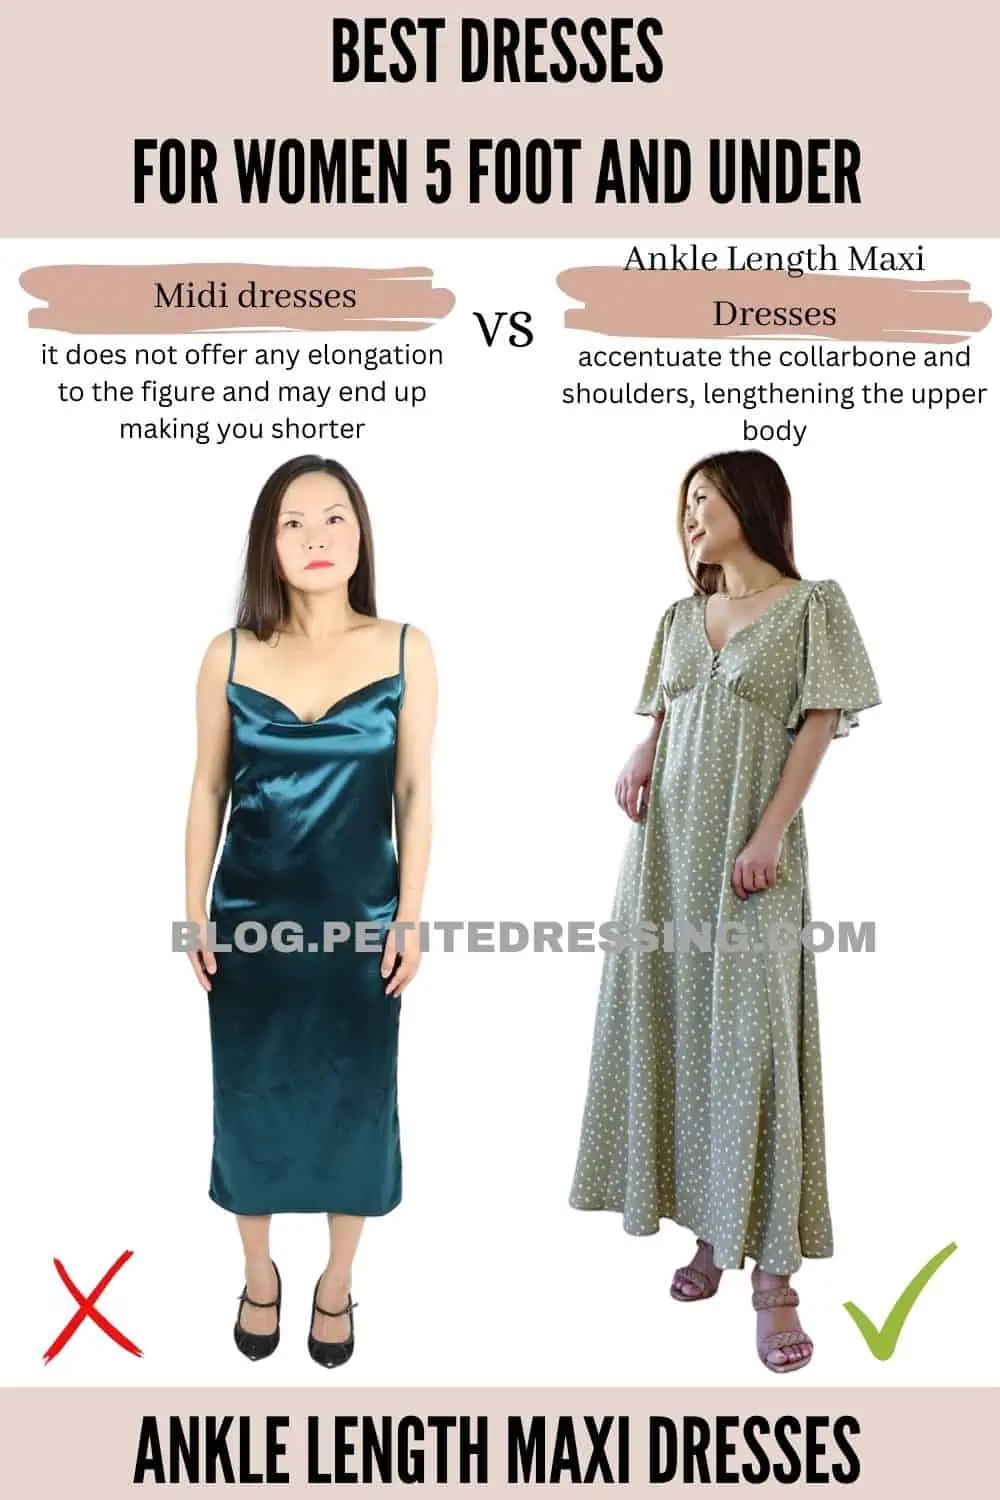 The Dress Style Guide for Women 5 Foot and under - Petite Dressing